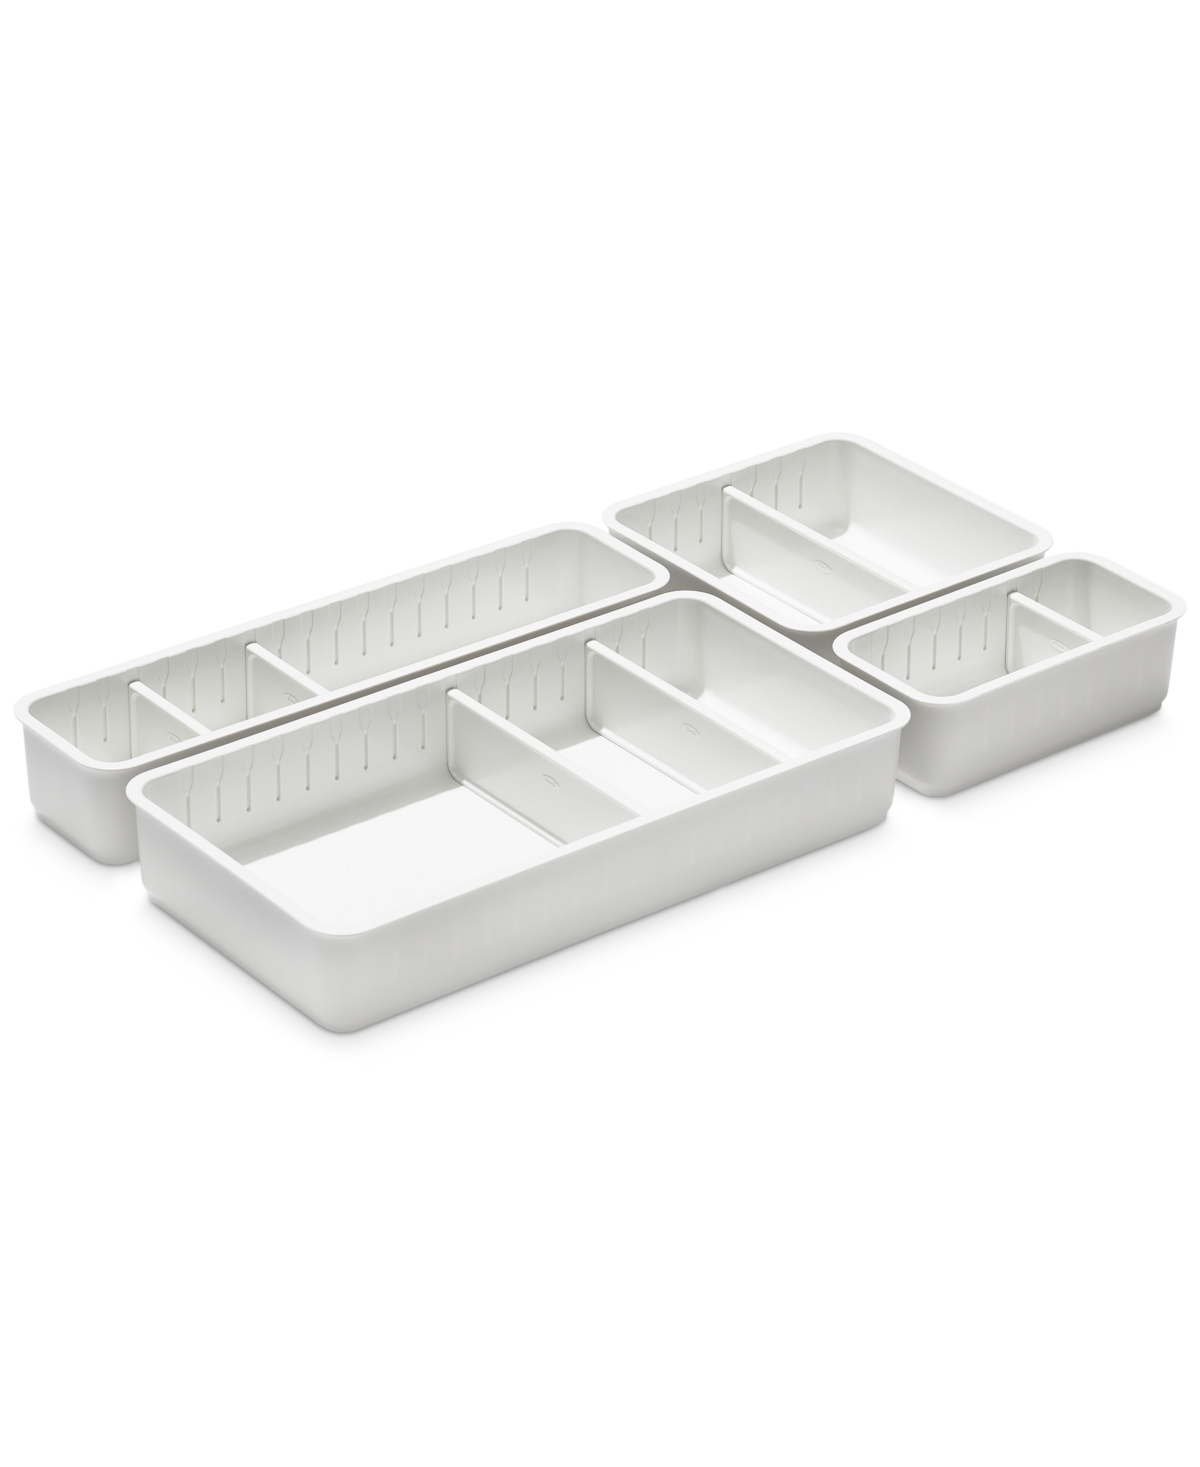 Oxo Good Grips Adjustable Drawer Bins, Set Of 4 In No Color